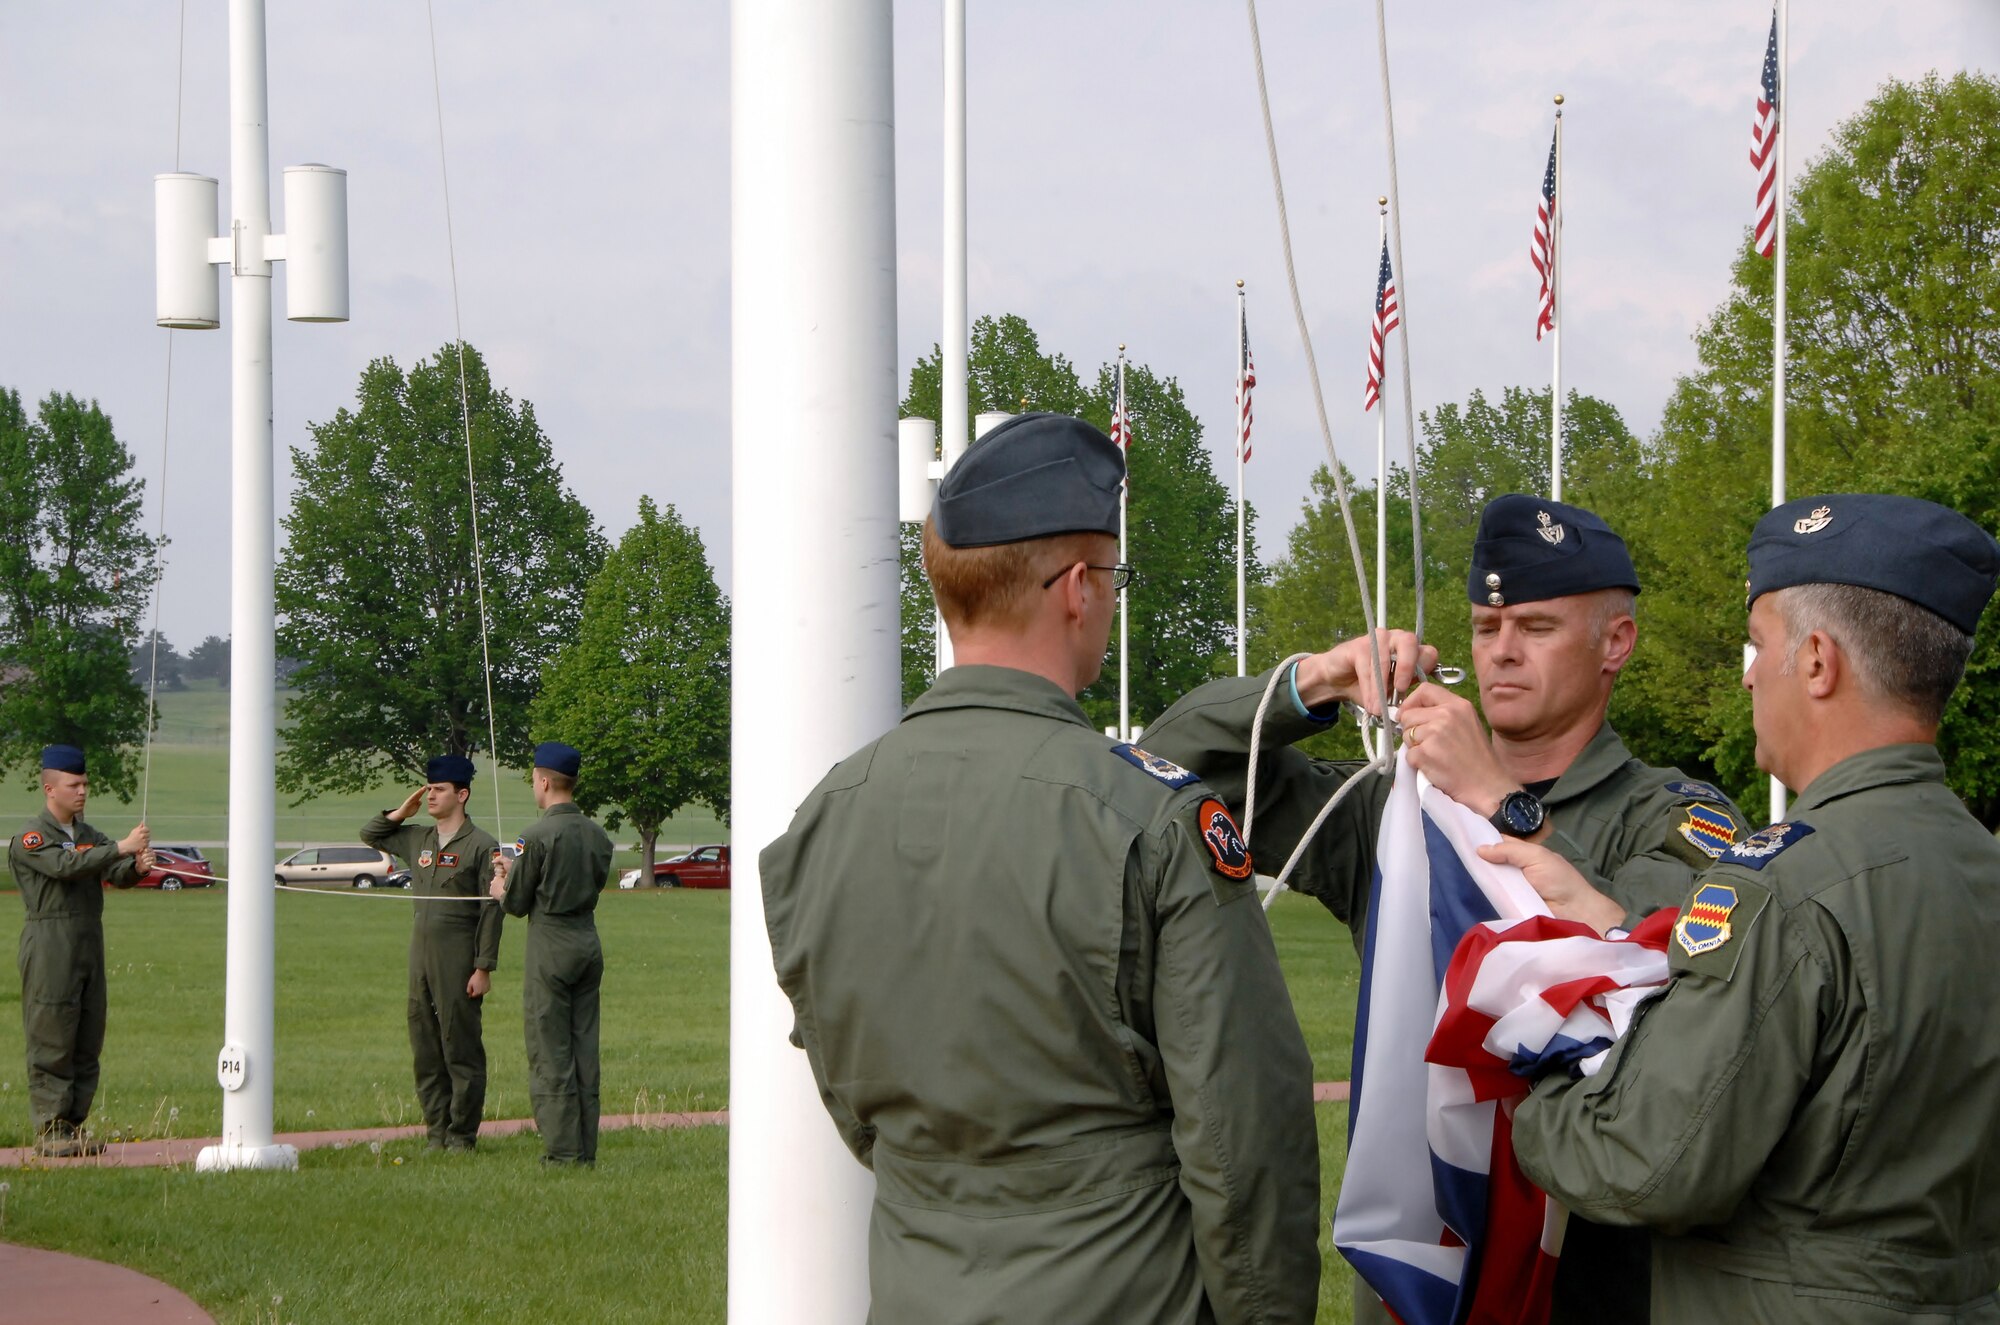 OFFUTT AIR FORCE BASE, Neb. -- The flag of the United Kingdom is taken off the flag pole by Royal Air Force members Master Aircrew Glyn Vigurs, Master Aircrew Stephen Jones and Master Aircrew Kevin Ross as three members of the U.S. Air Force lowering the American flag behind them during a special retreat ceremony here May 18. The RAF members are attending RC-135V/W initial qualification training here and joined with other members of the 338th Combat Training Squadron in the special ceremony at the parade grounds. (Air Force photo by Dana Heard)